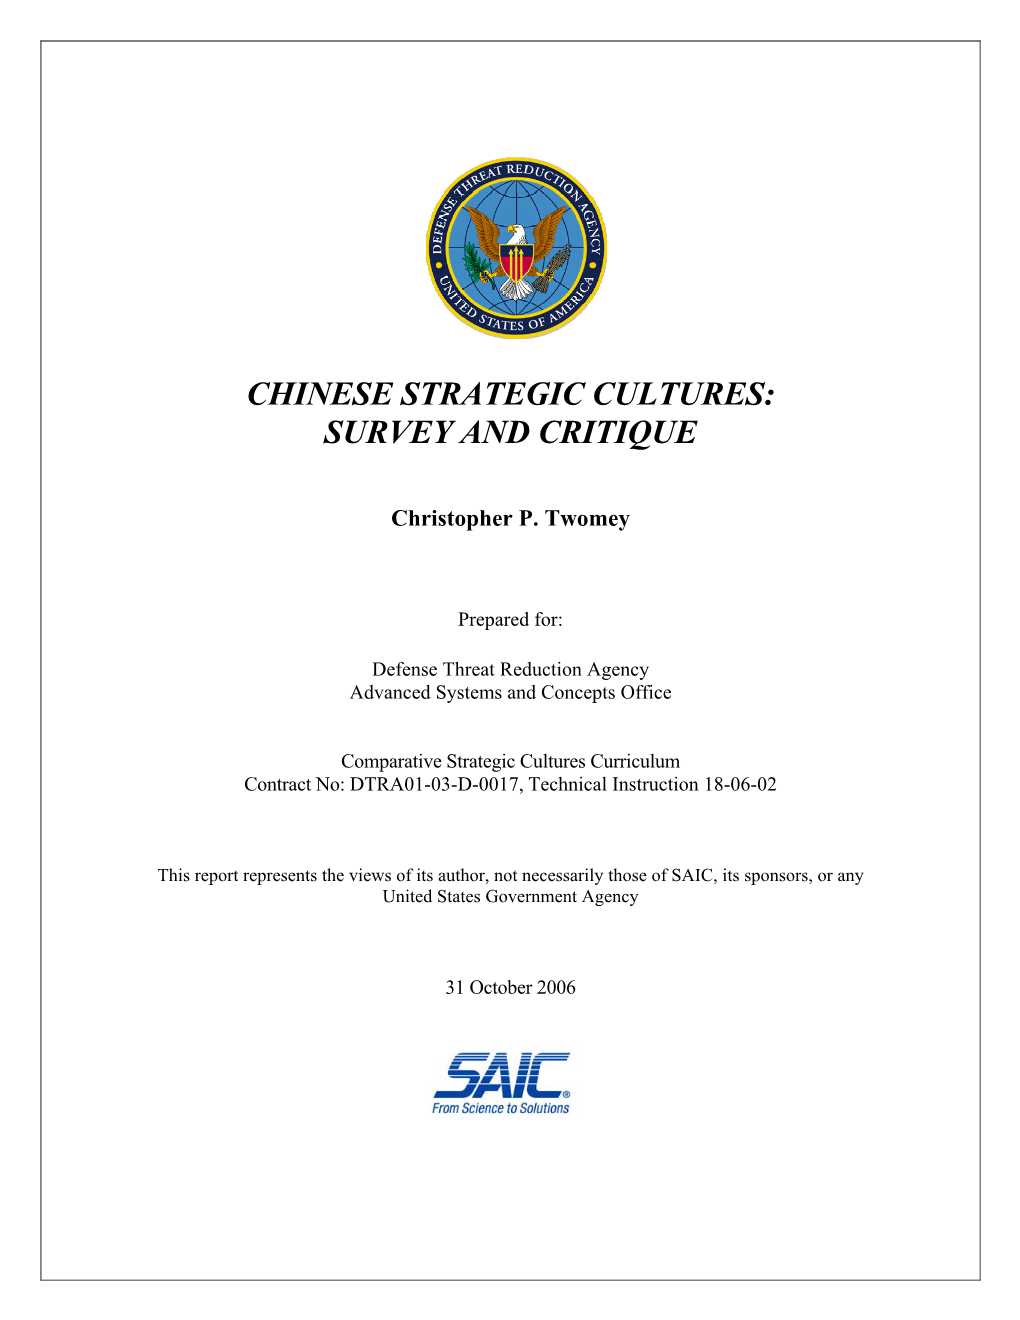 Chinese Strategic Cultures: Survey and Critique